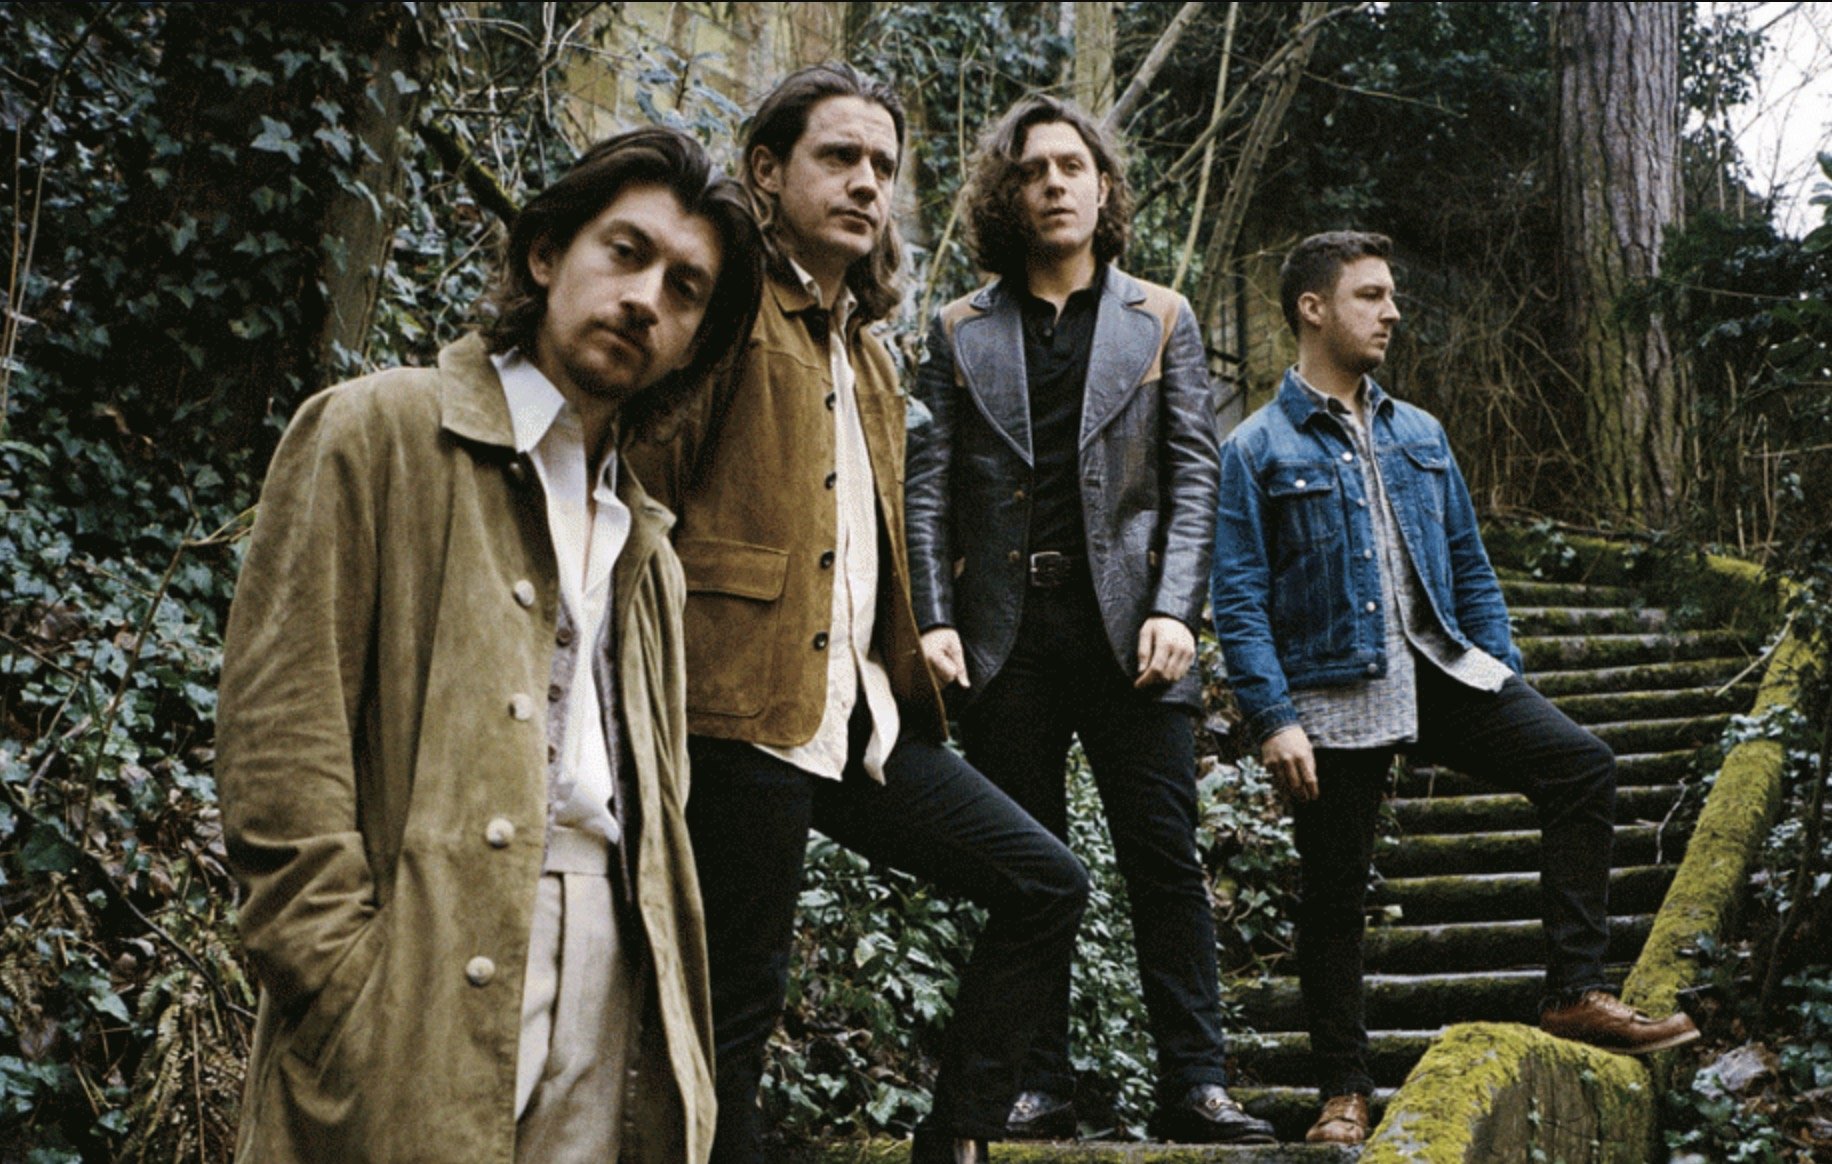 Arctic Monkeys’ label Domino grew its UK turnover by 31.6% in 2021, driven by strong catalog sales – Music Business Worldwide